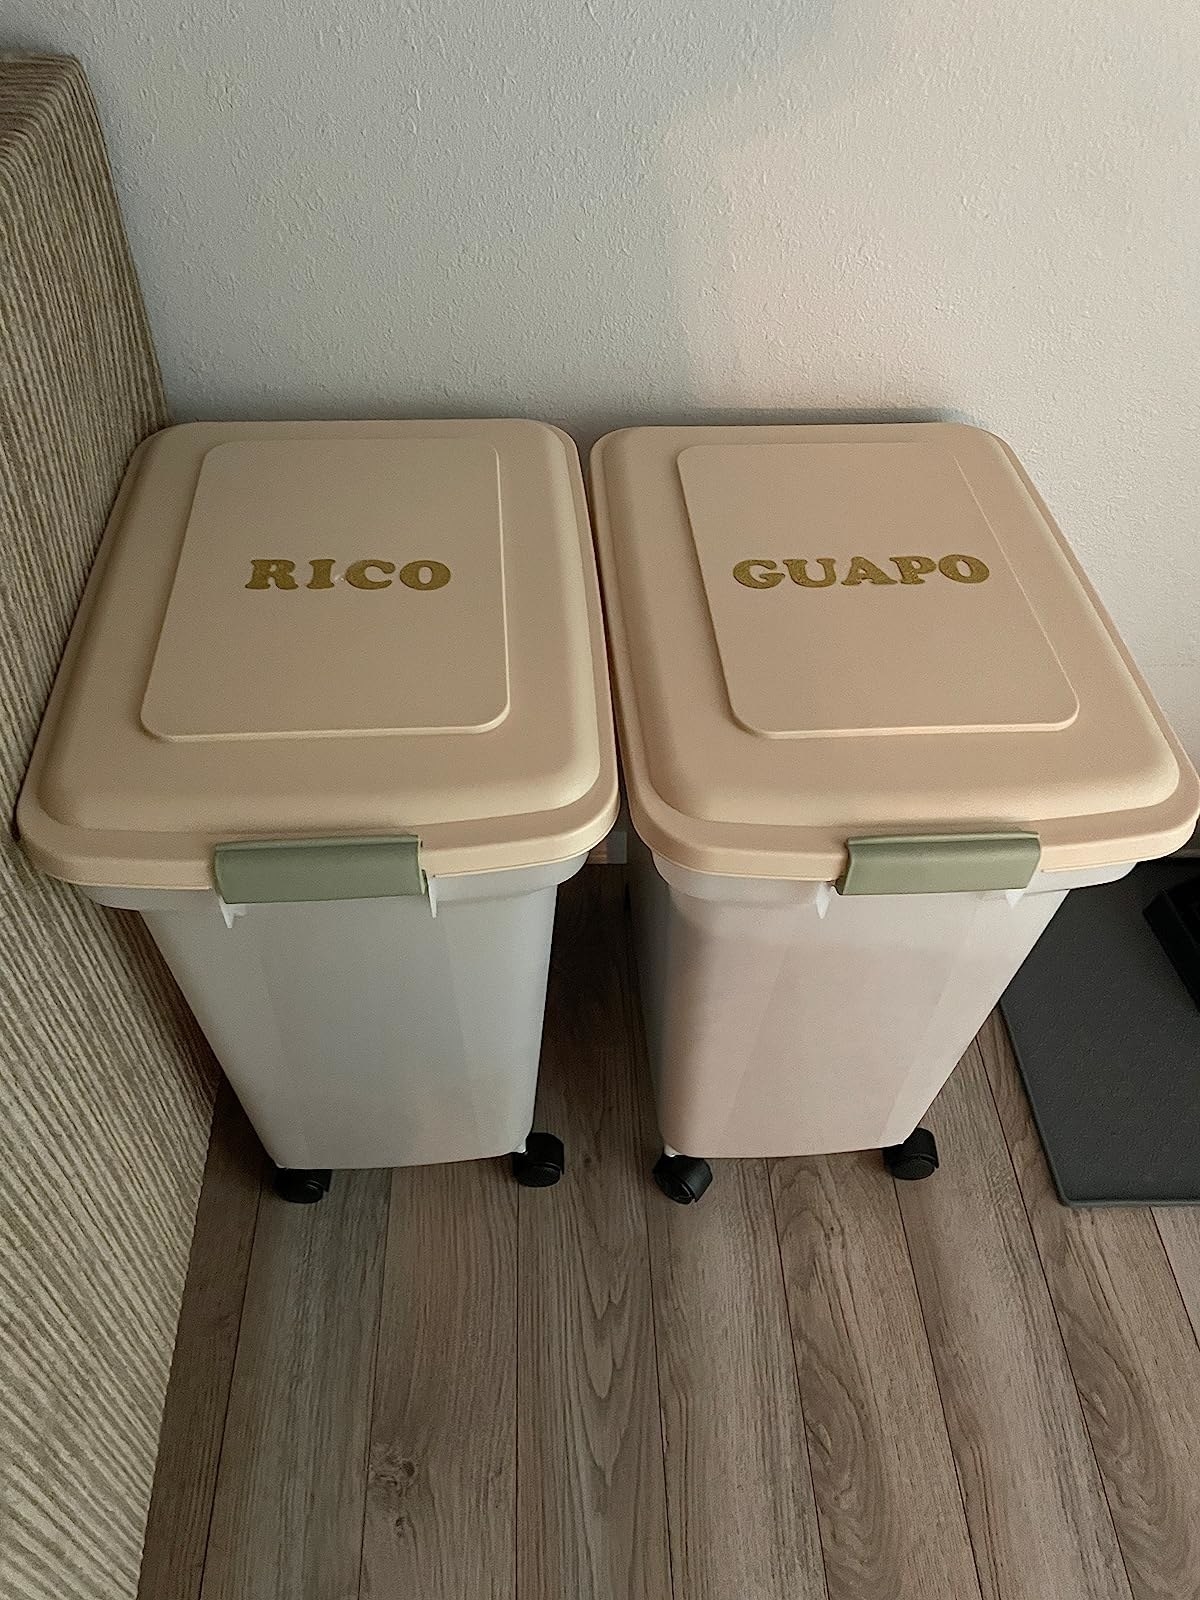 Reviewer image of two of the containers with their pets&#x27; names on them